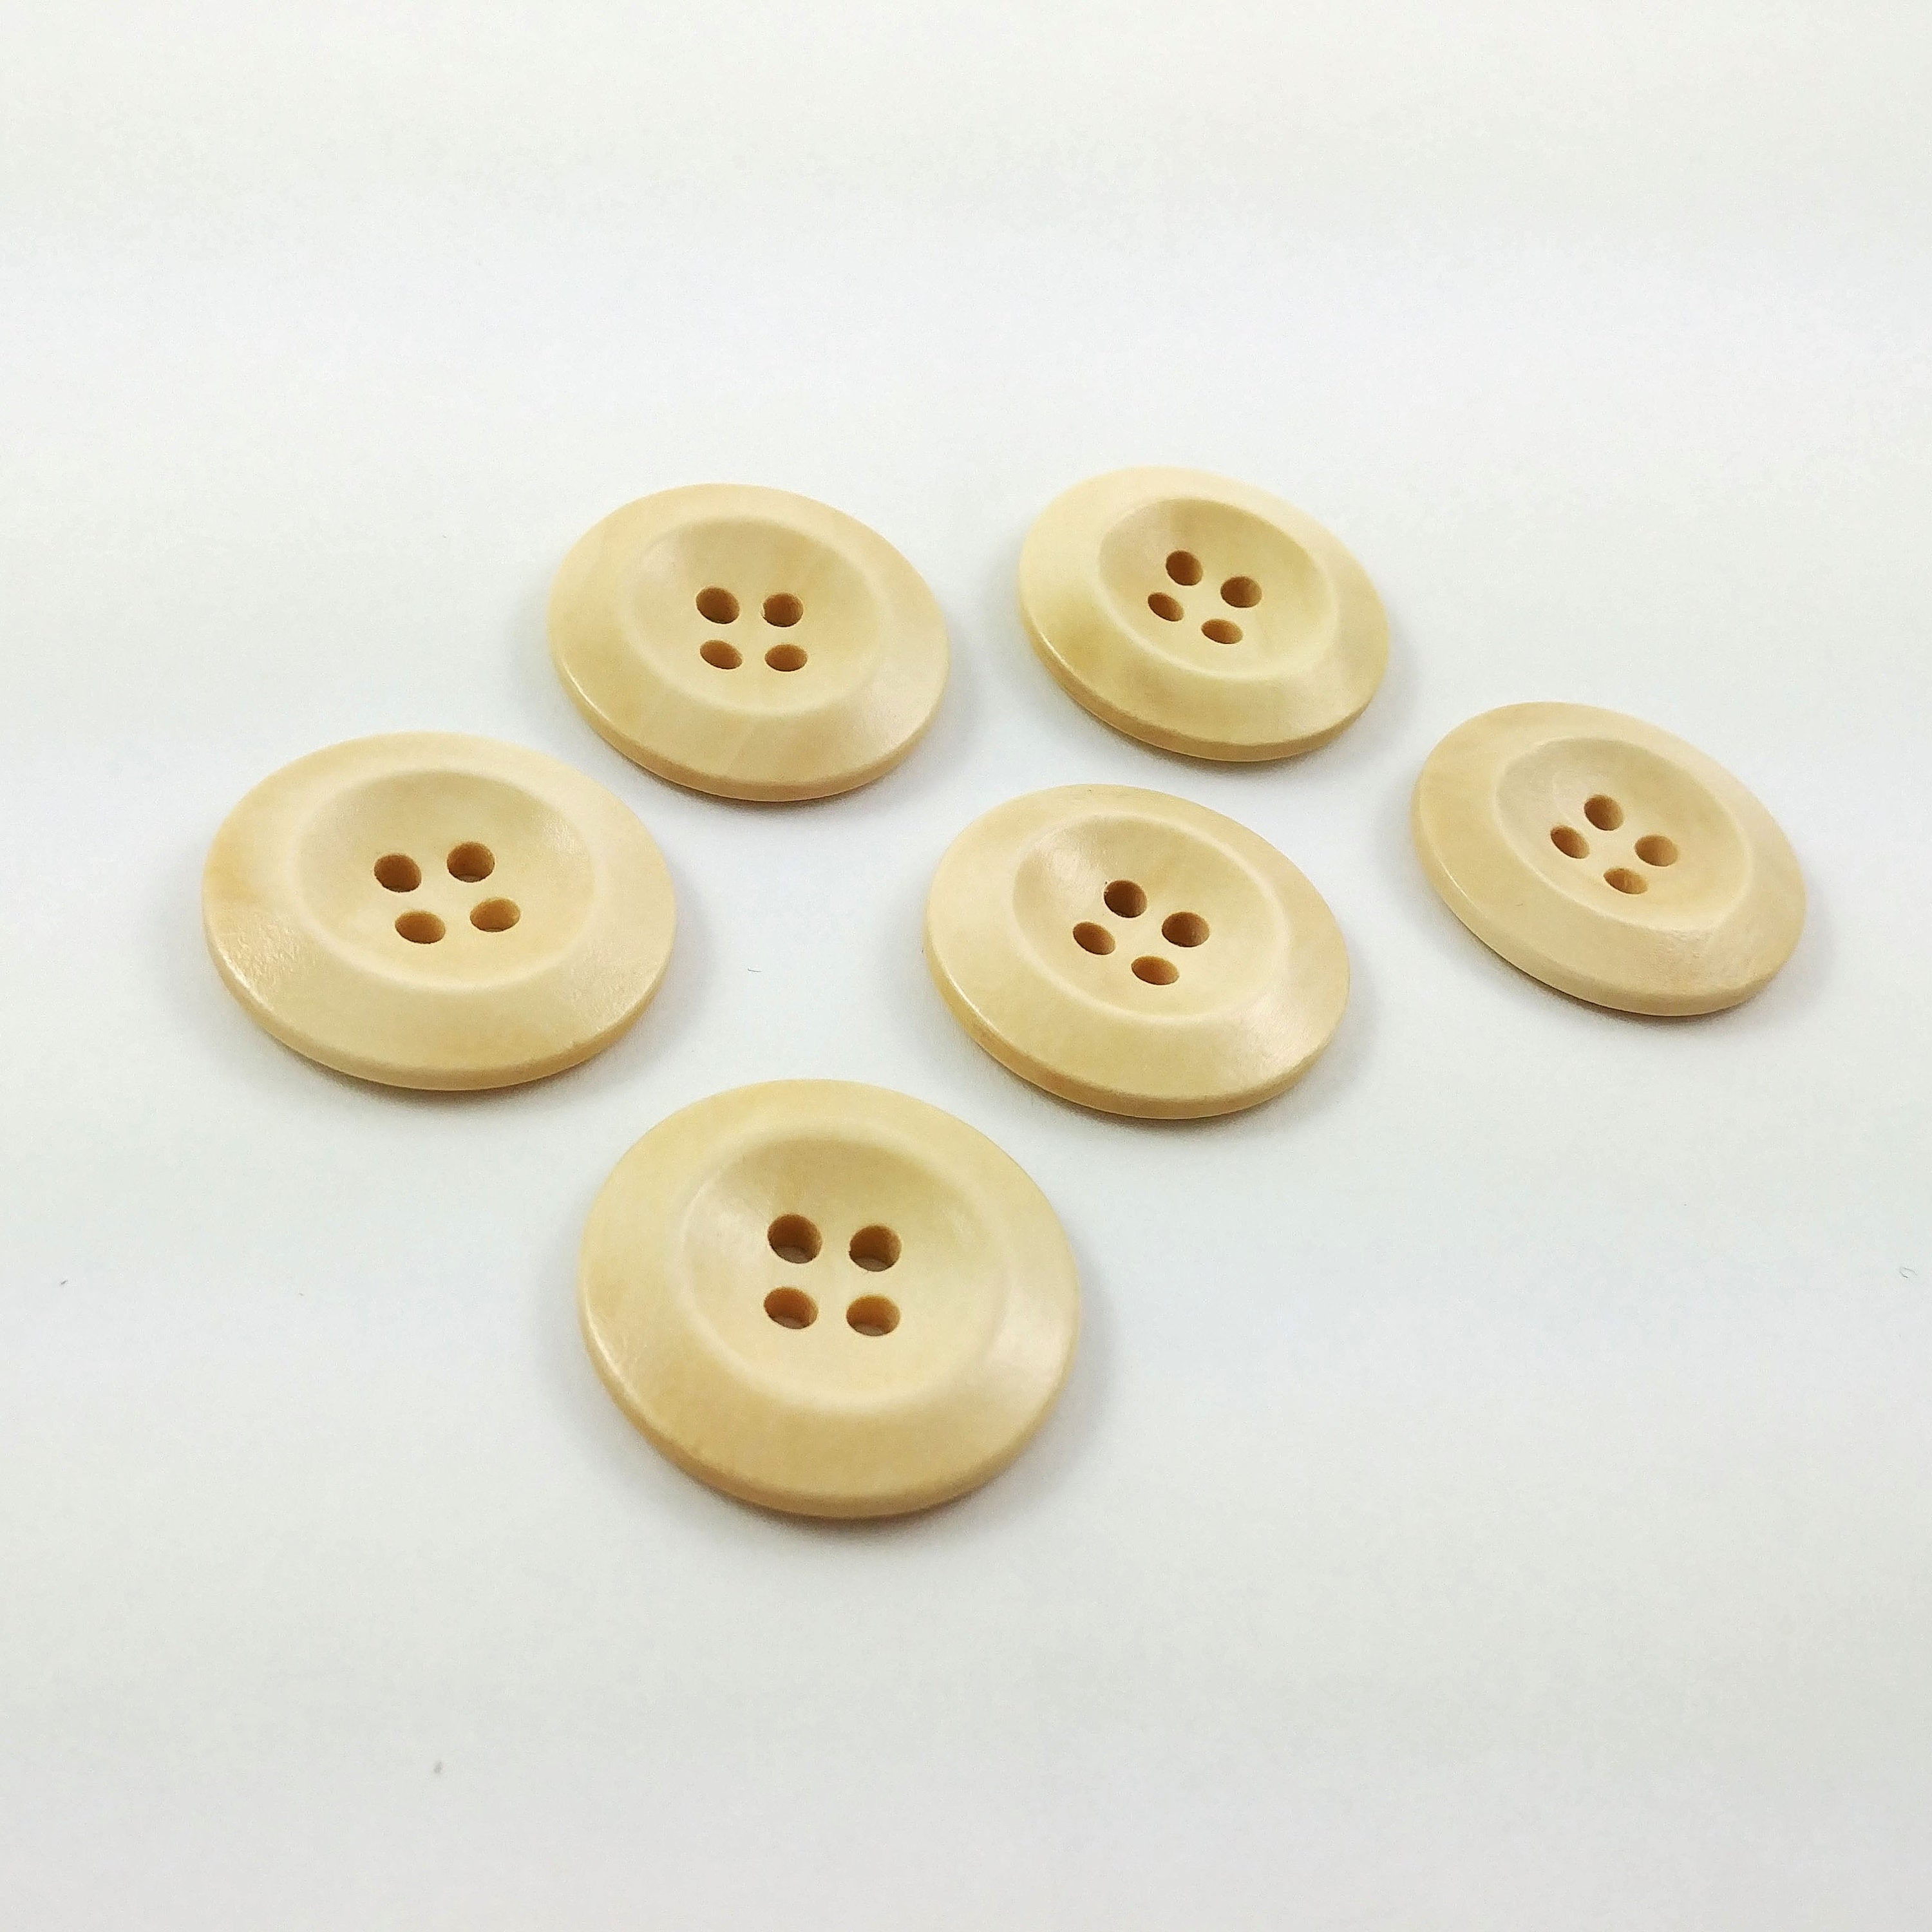 Small wood buckle buttons 20mm - set of 6 natural wood buttons